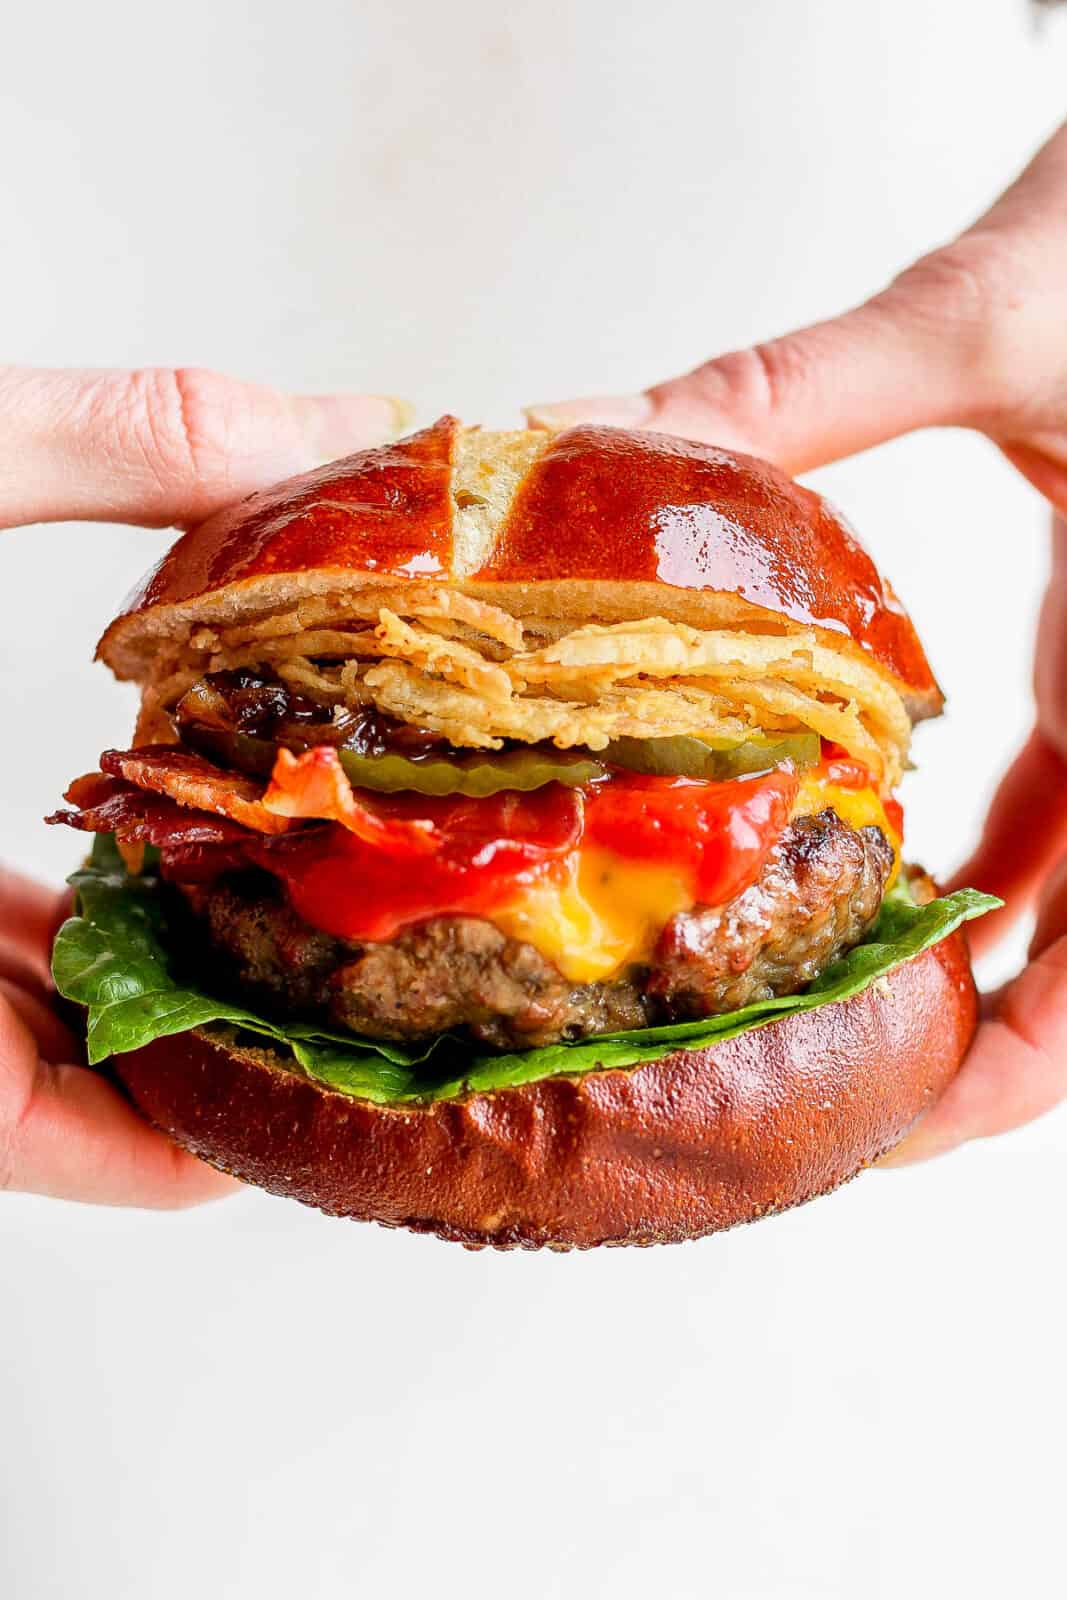 Onion strings on an ultimate grilled burger.